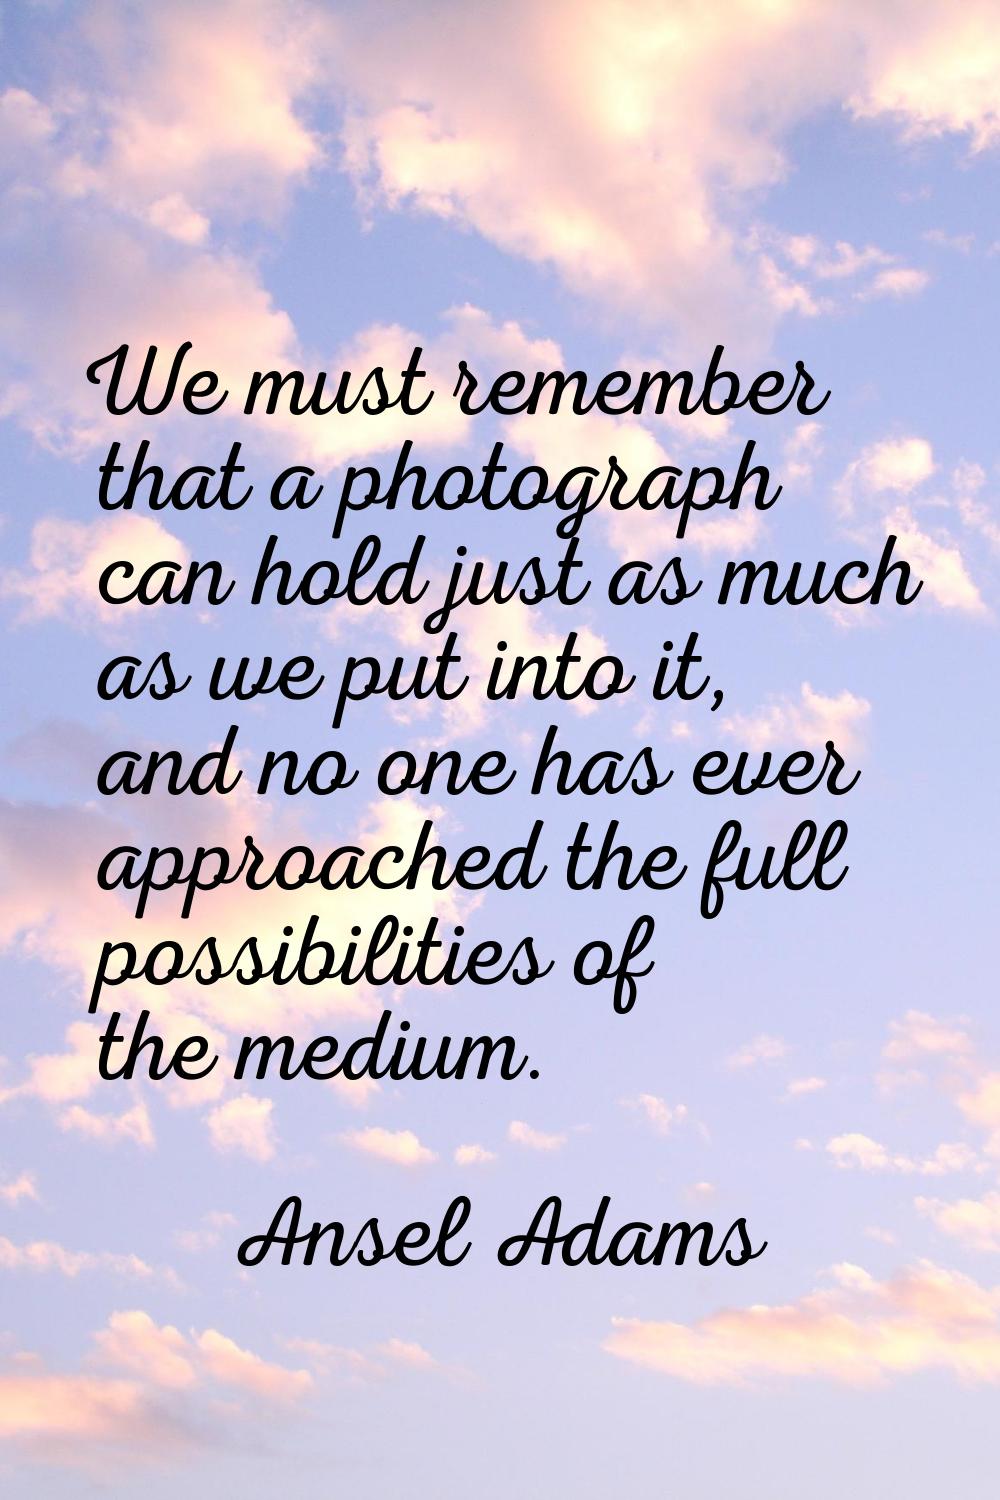 We must remember that a photograph can hold just as much as we put into it, and no one has ever app